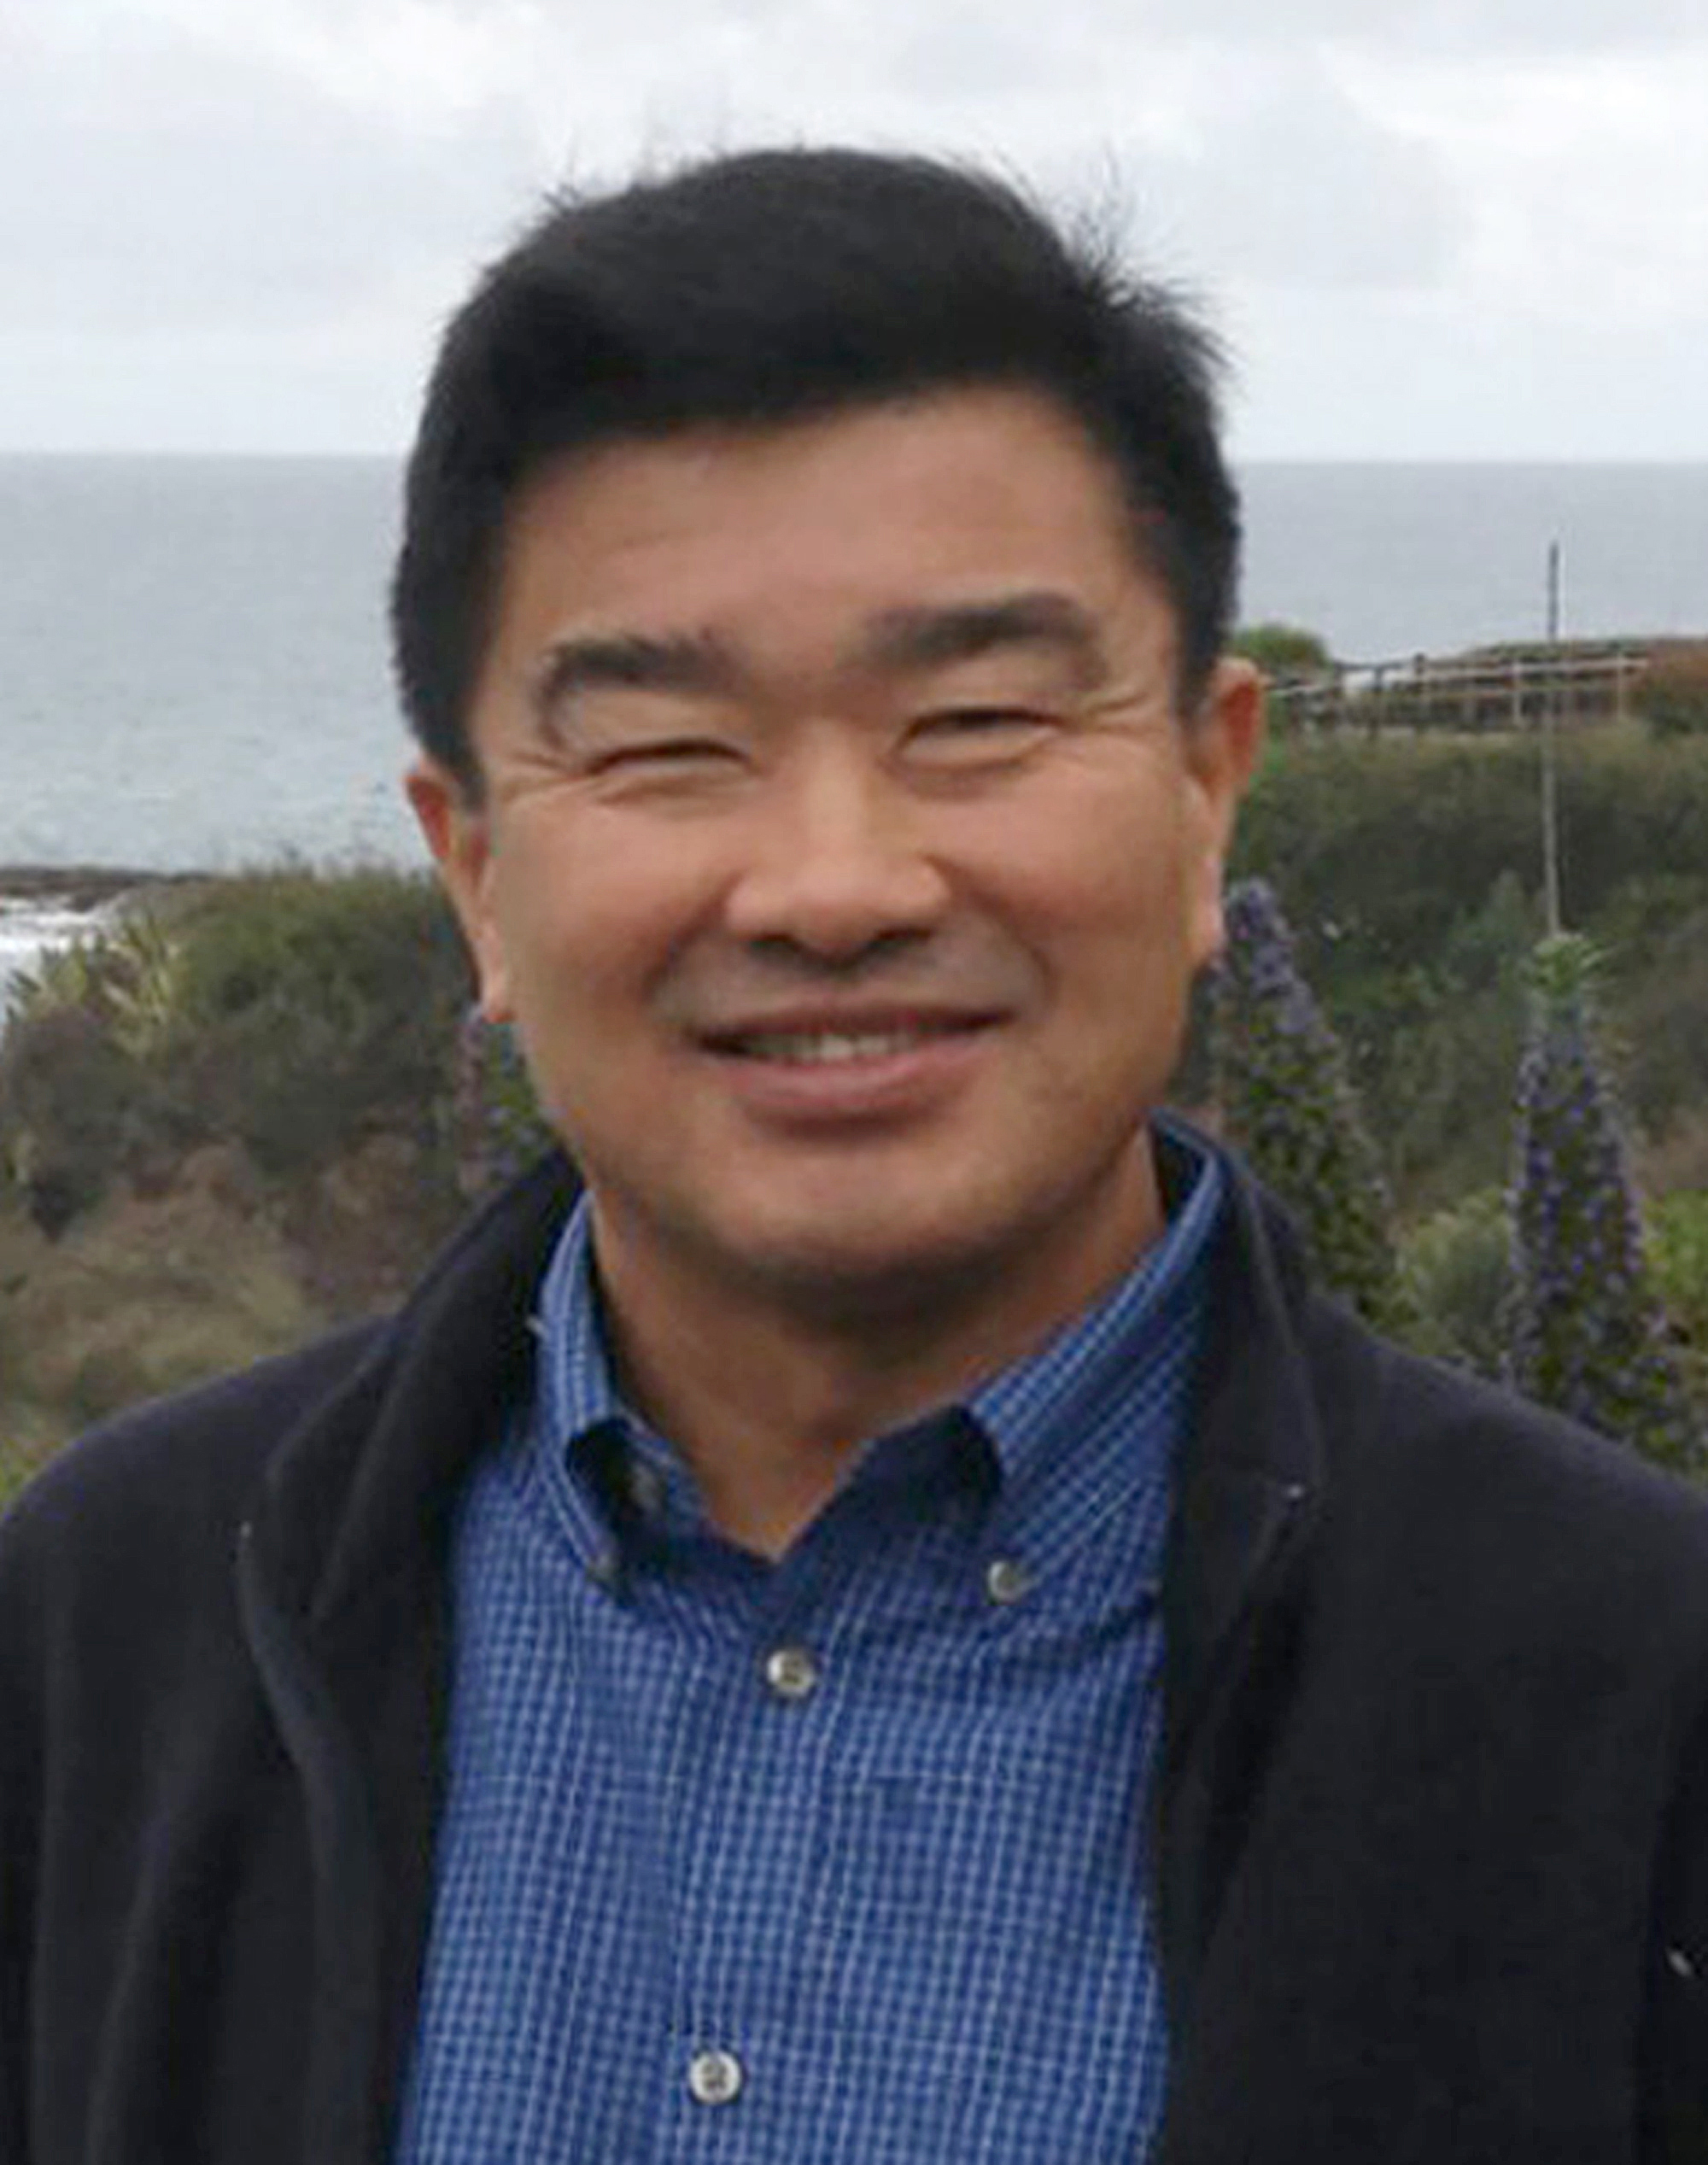 PHOTO: Tony Kim (also known as Kim Sang-duk), in a 2016 photo provided by his family taken in California. Kim was detained at the Pyongyang airport. He taught accounting at the Pyongyang University of Science and Technology.